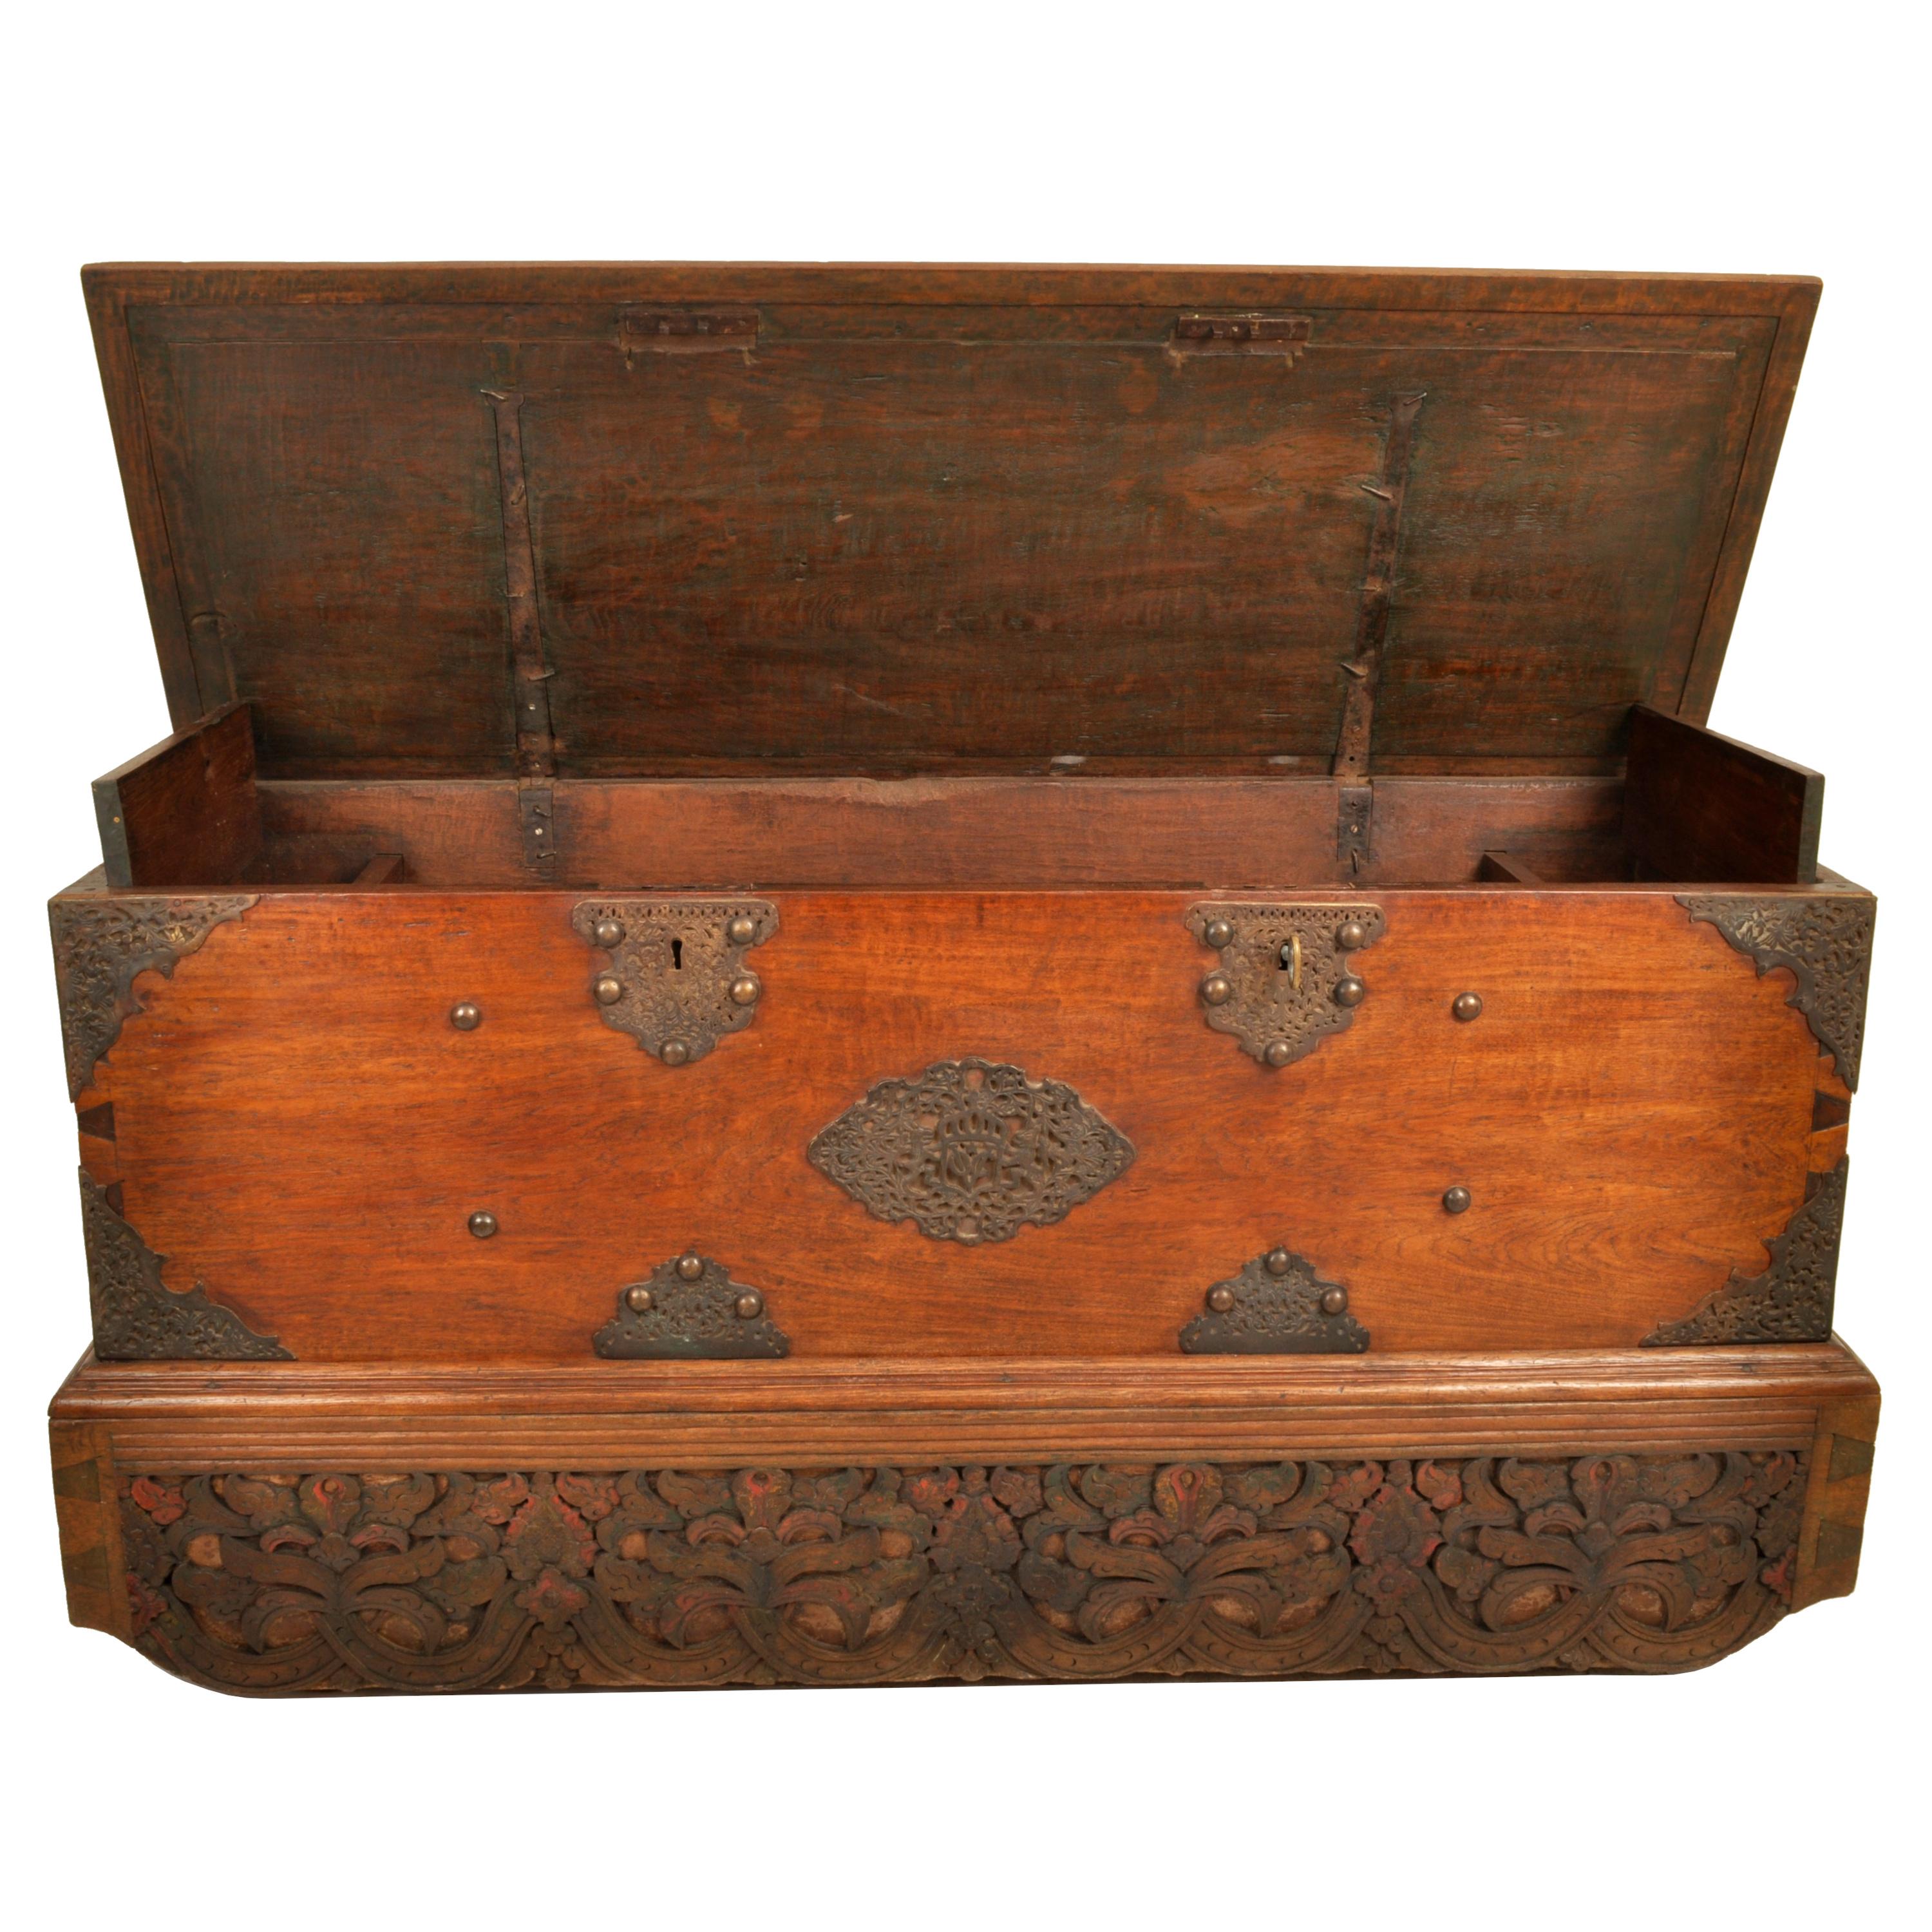 Indonesian Antique 18th Century Dutch East India Company VOC Carved Teak Governor's Chest